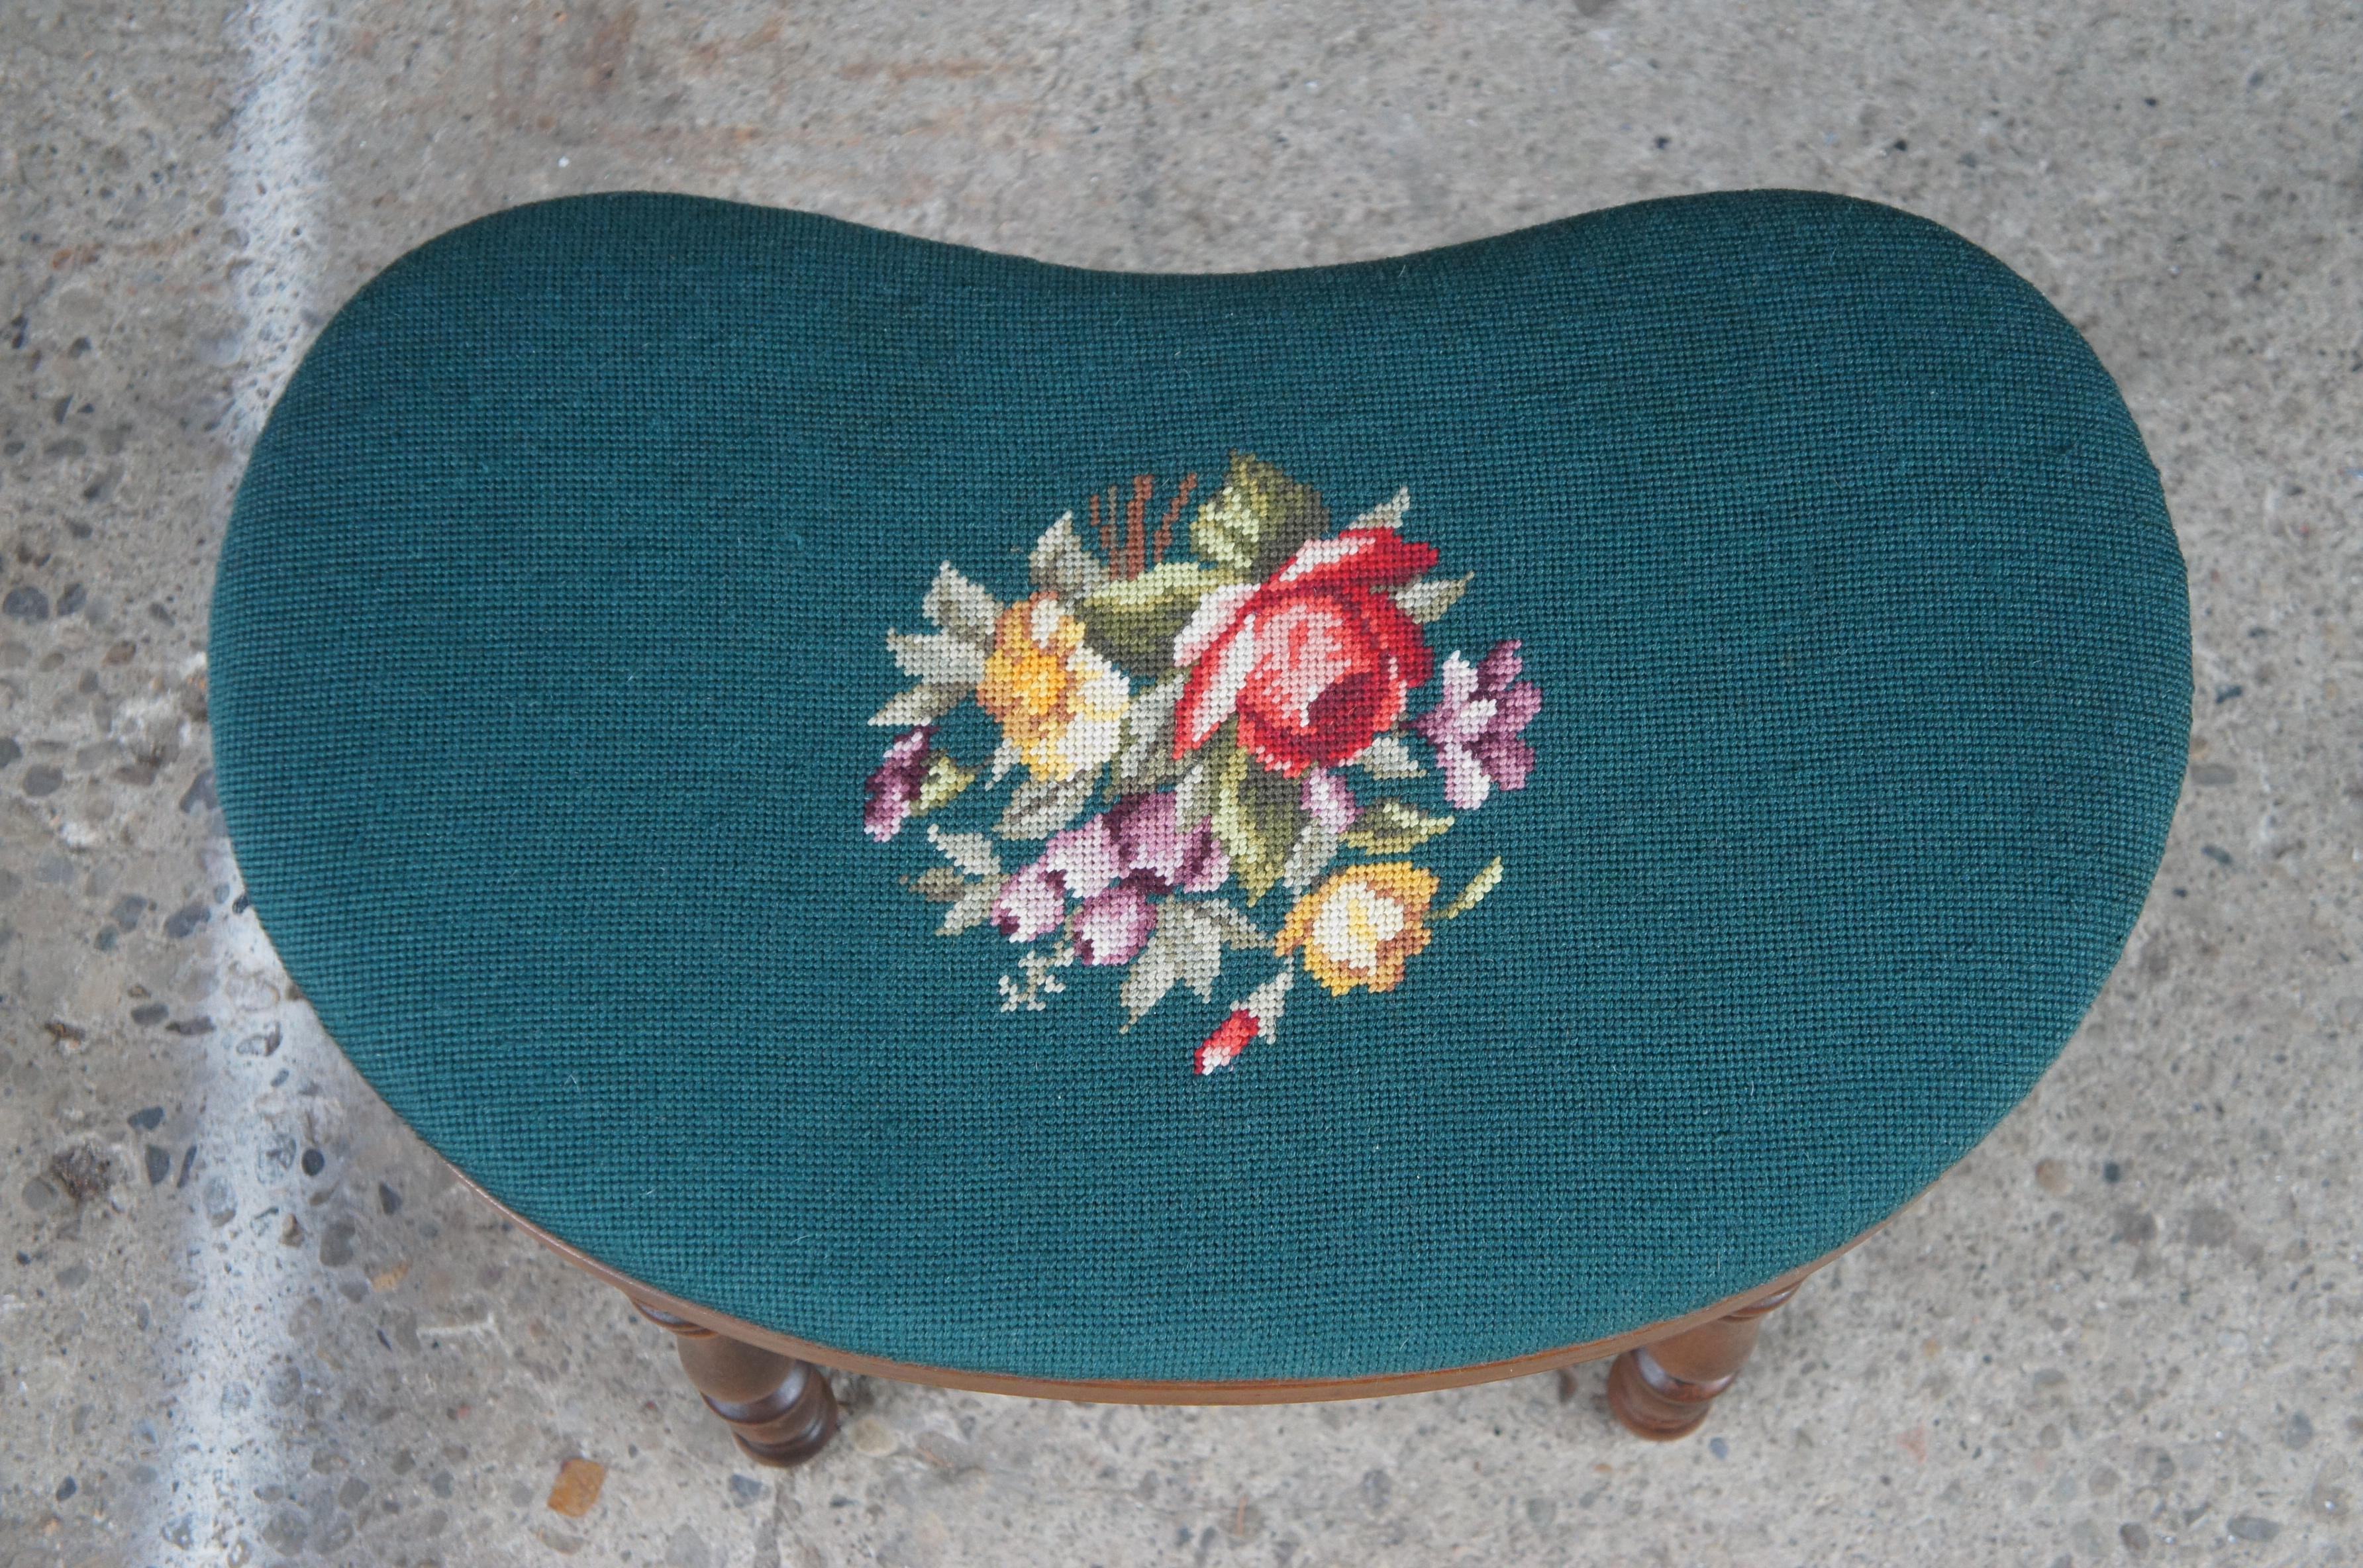 Textile Mid Century Kidney Bean Green Floral Embroidered Foot Stool Piano Bench Ottoman For Sale